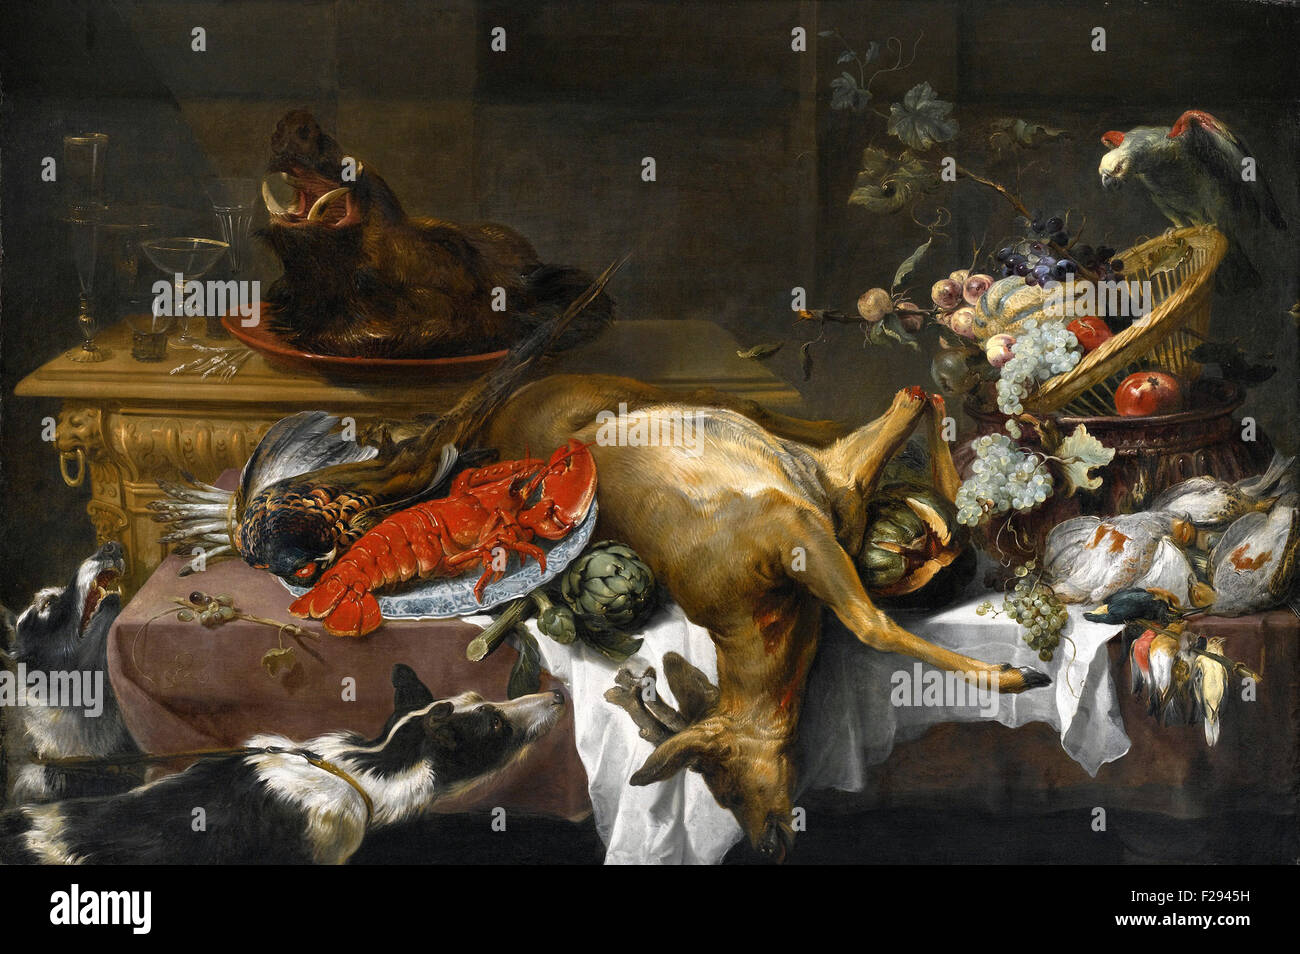 Frans Snyders or Frans Snijders Still life with Game, a Lobster and laid on a Table. A Parrot and two Greyhounds Stock Photo Alamy